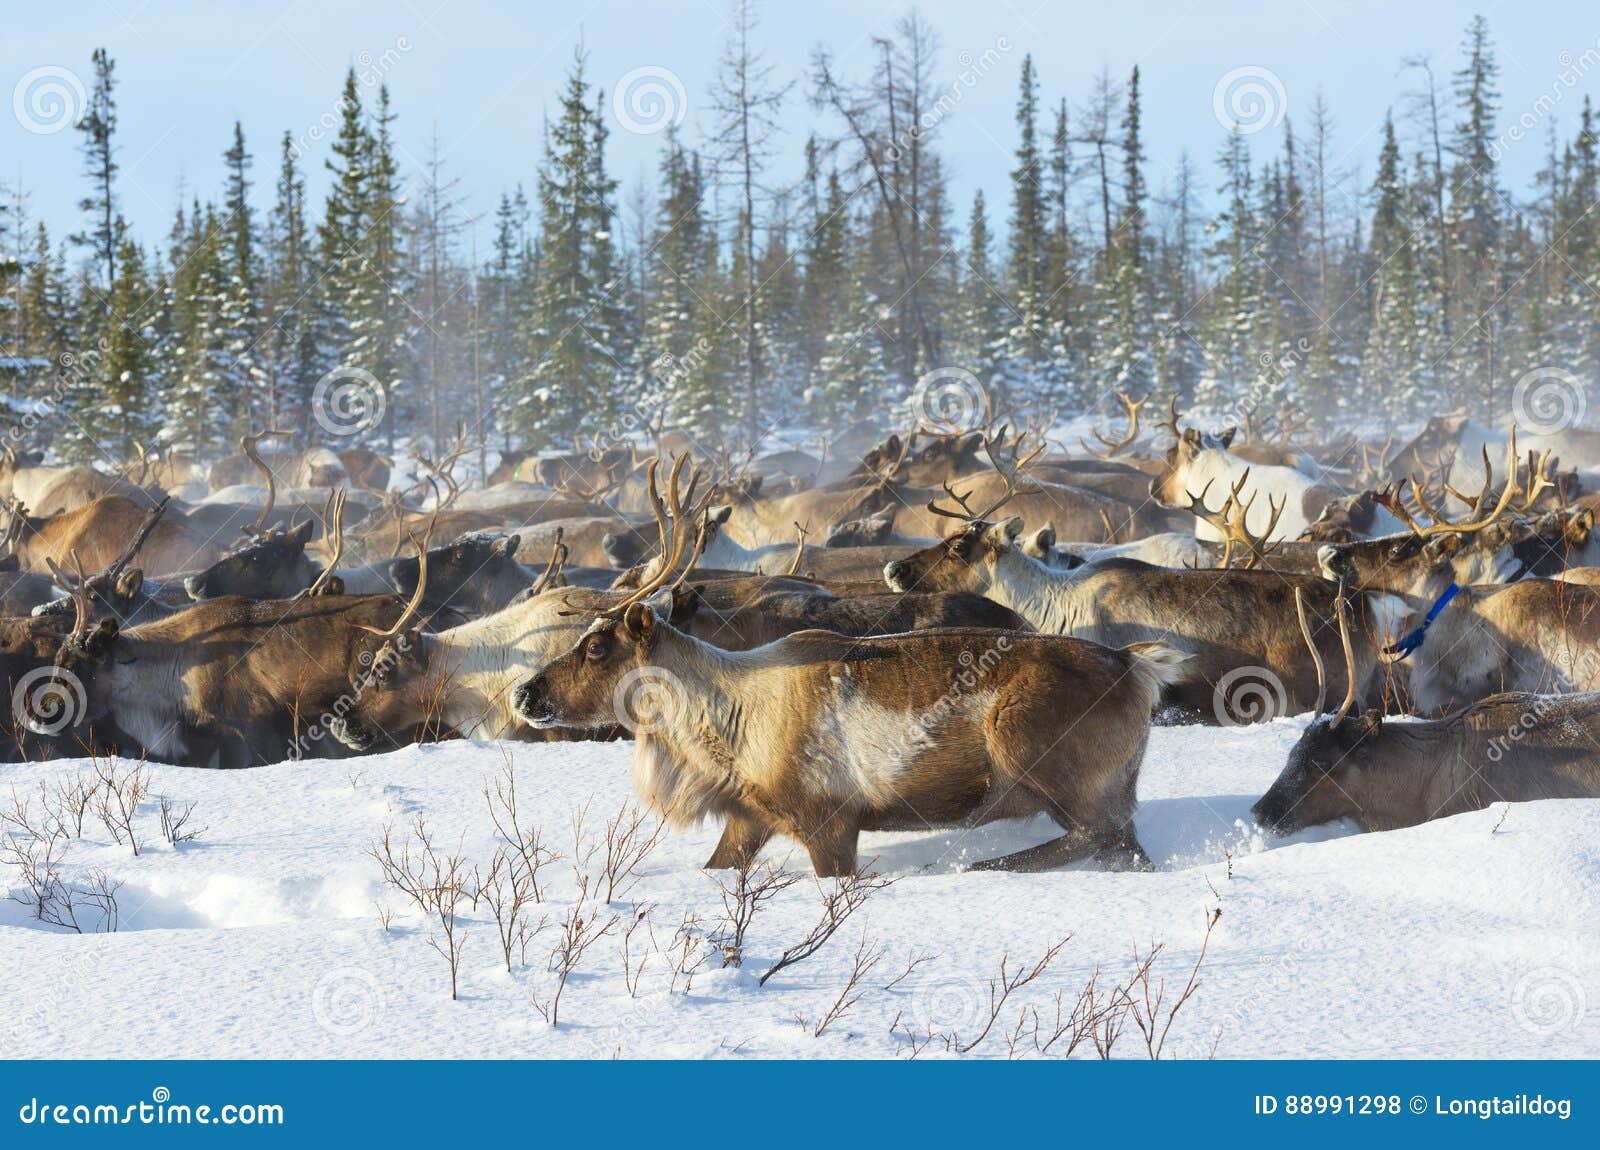 reindeer migrate in the tundra